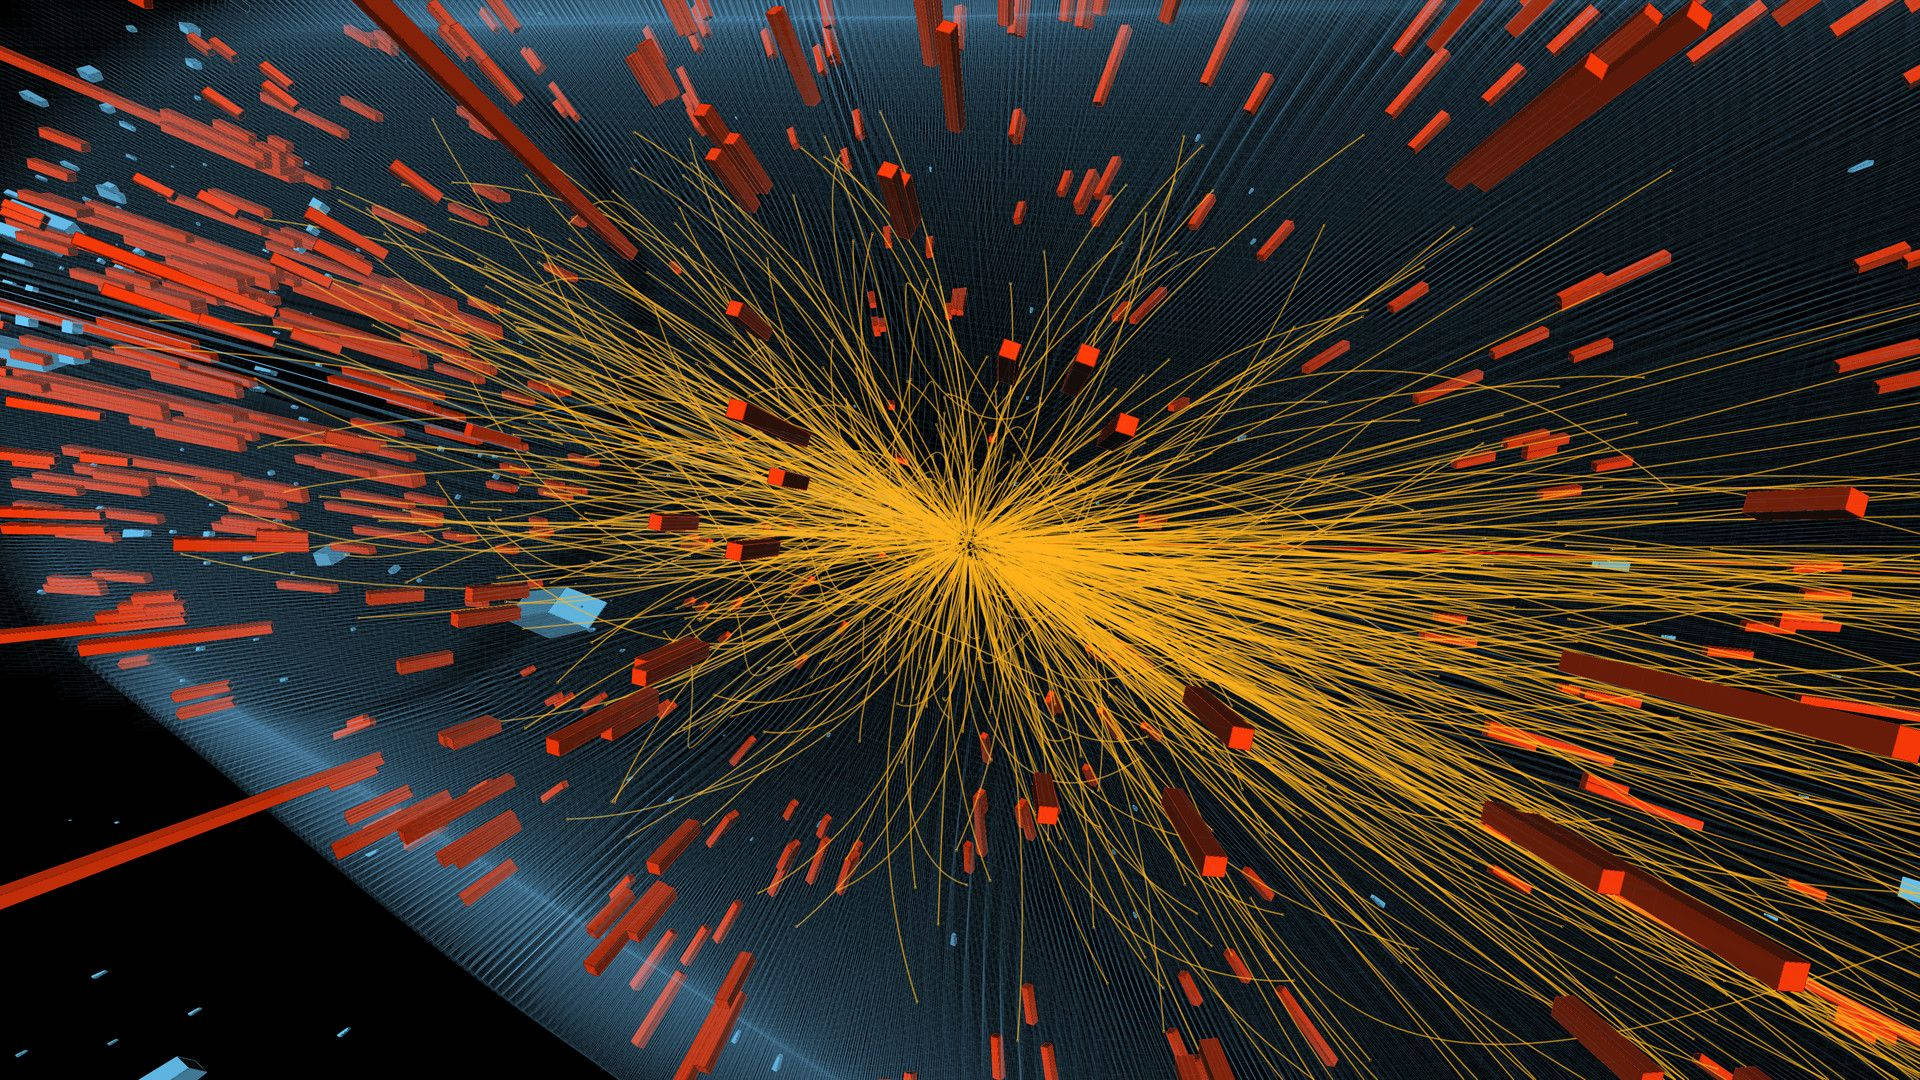 Theoretical Physics Insight - Large Hadron Collider Wallpaper